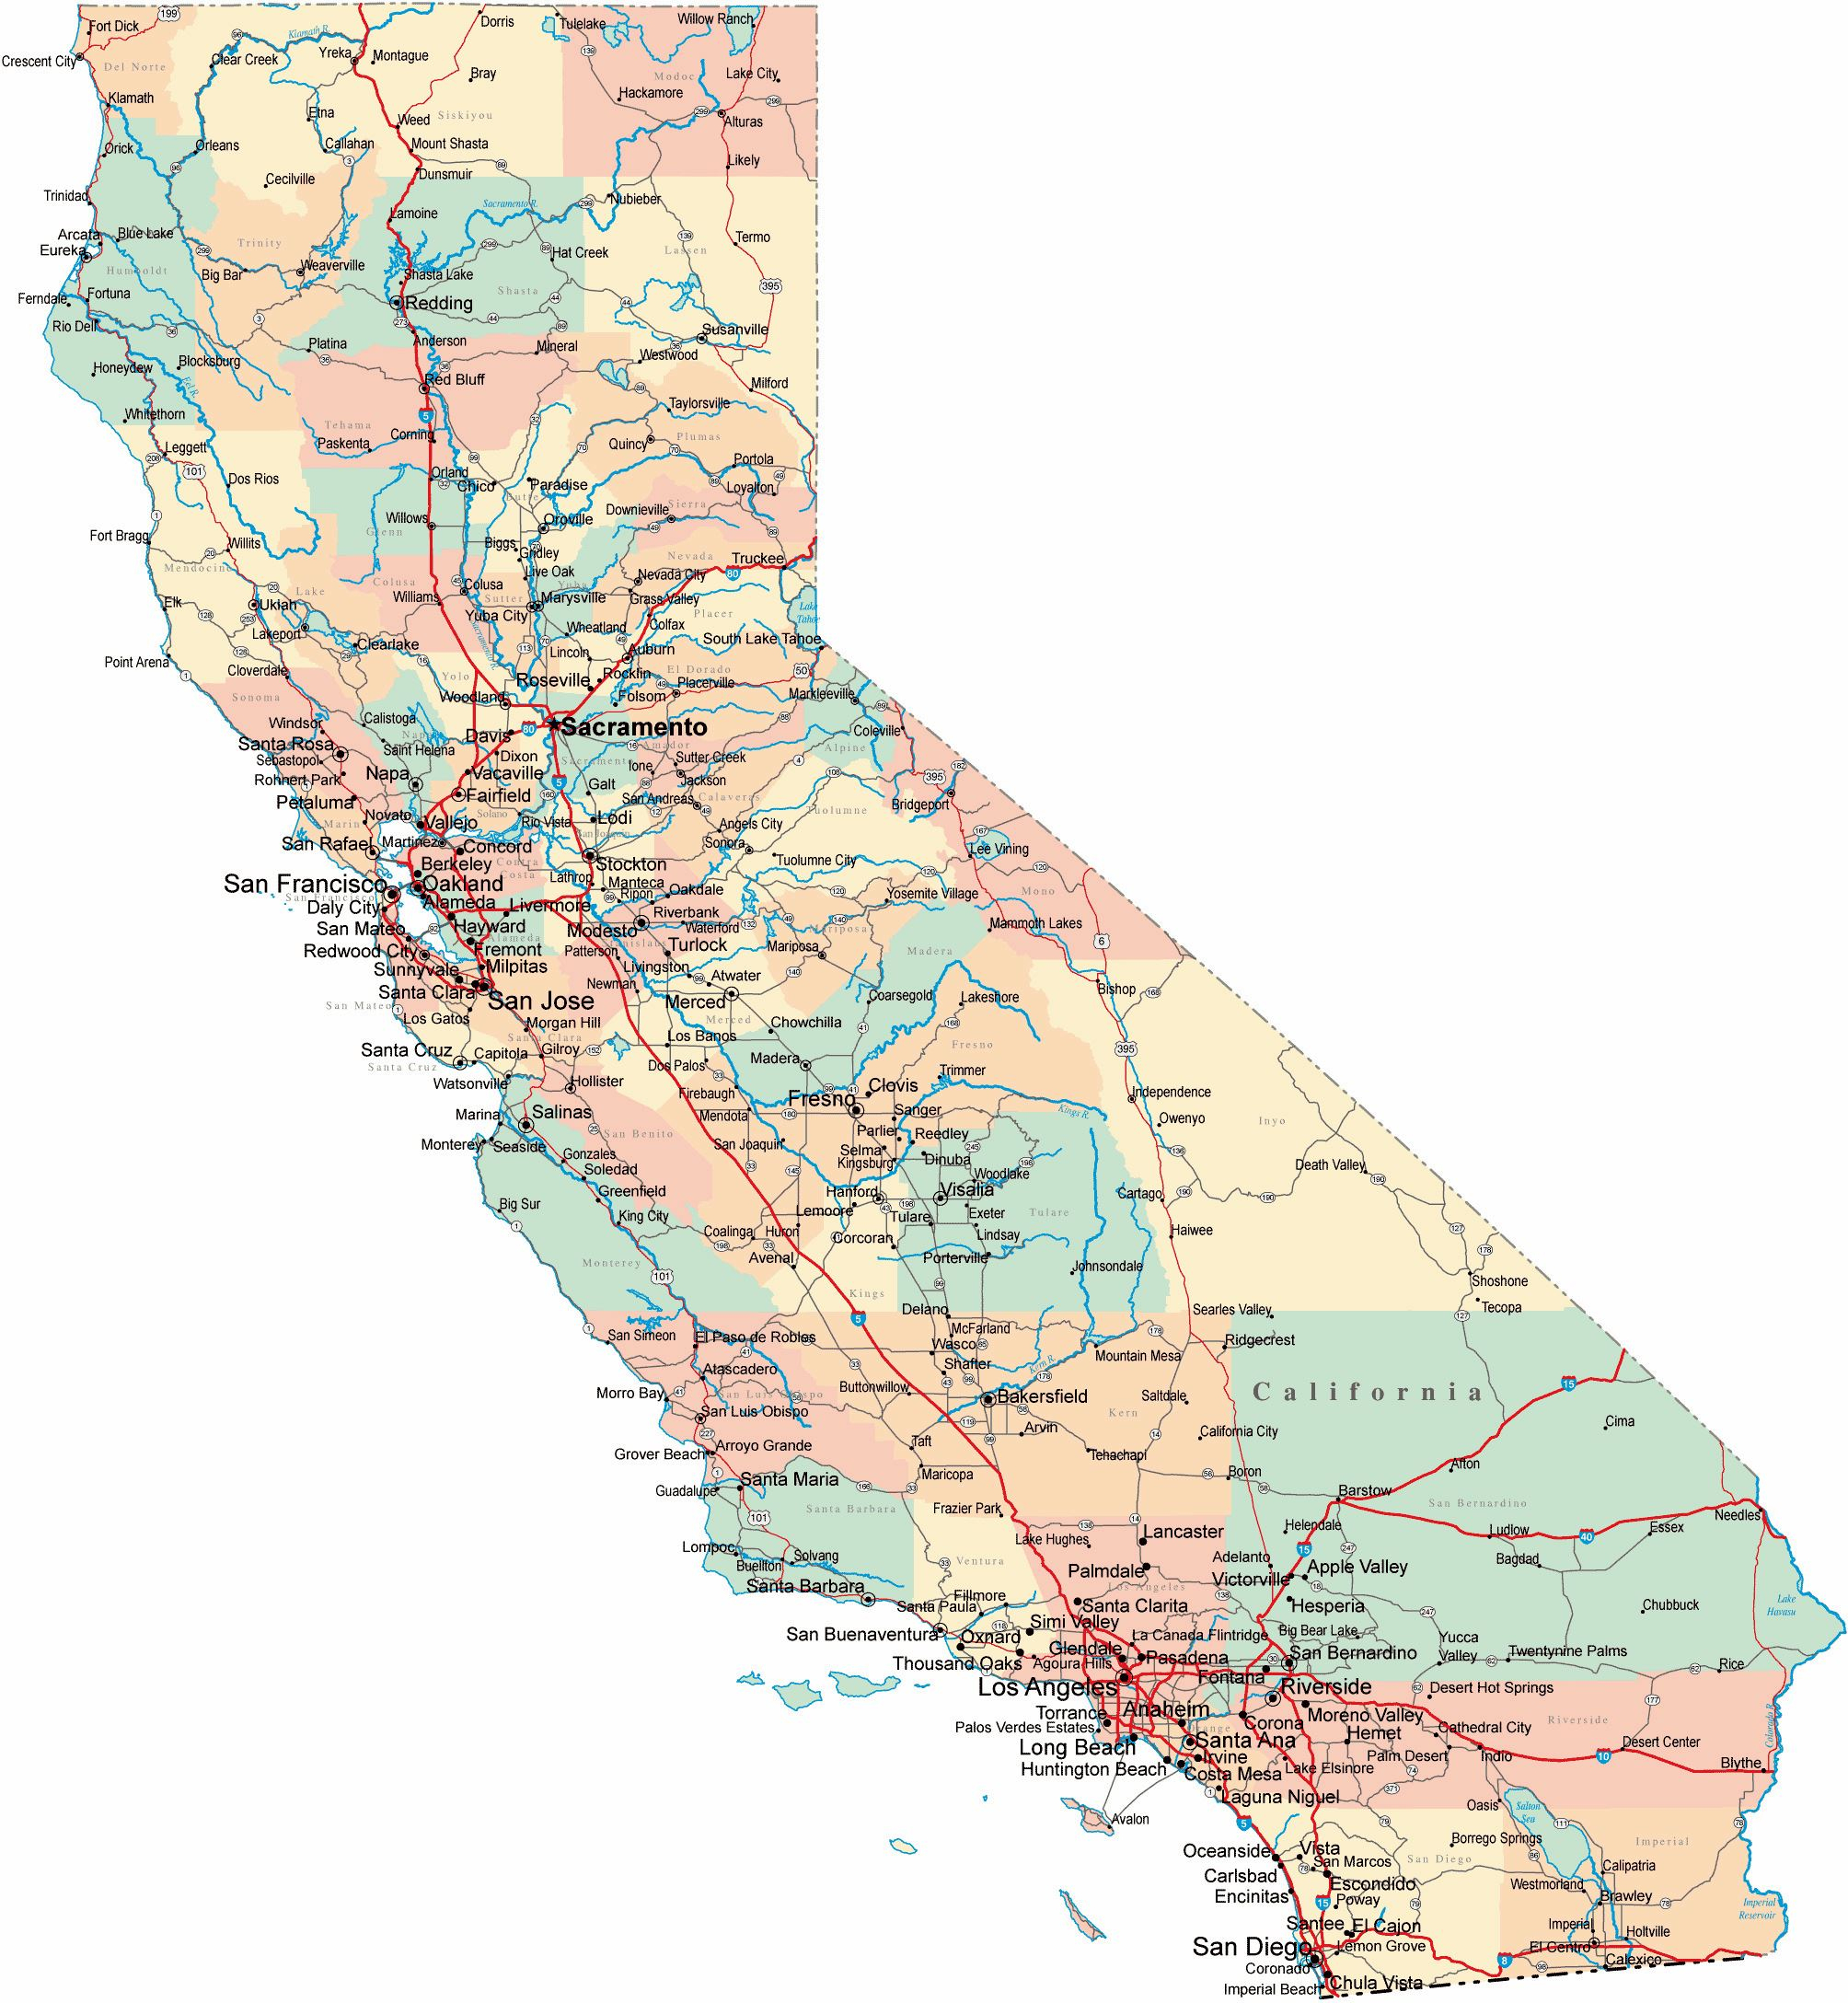 Large California Maps For Free Download And Print | High-Resolution - California Road Map Pdf